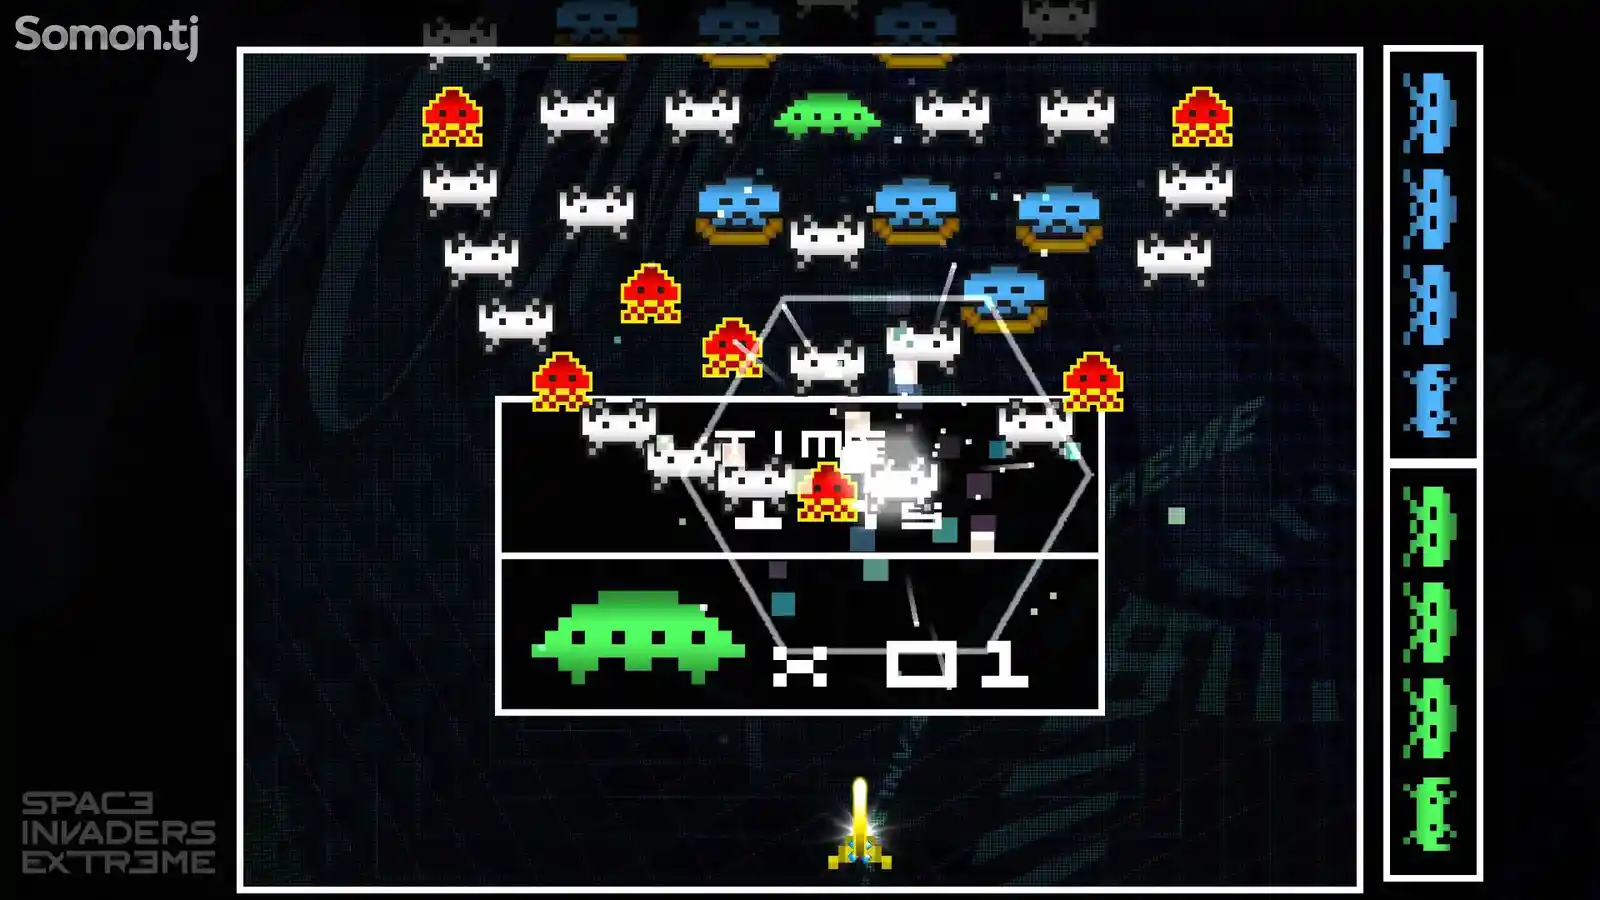 Игра Space invaders forever для PS-4 / 5.05 / 6.72 / 7.02 / 7.55 / 9.00 /-3